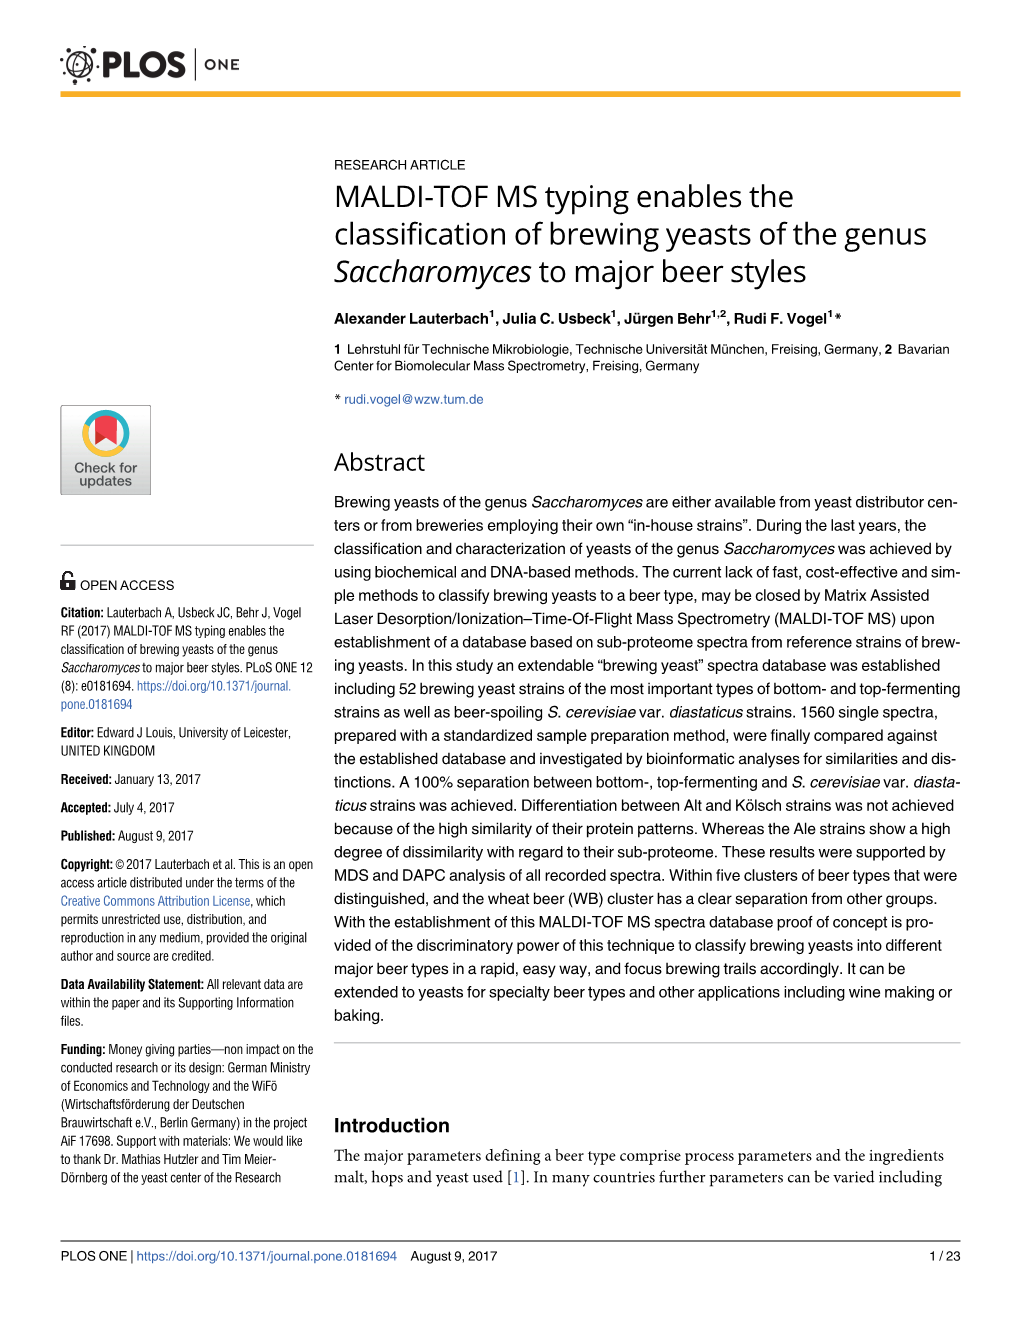 MALDI-TOF MS Typing Enables the Classification of Brewing Yeasts of the Genus Saccharomyces to Major Beer Styles